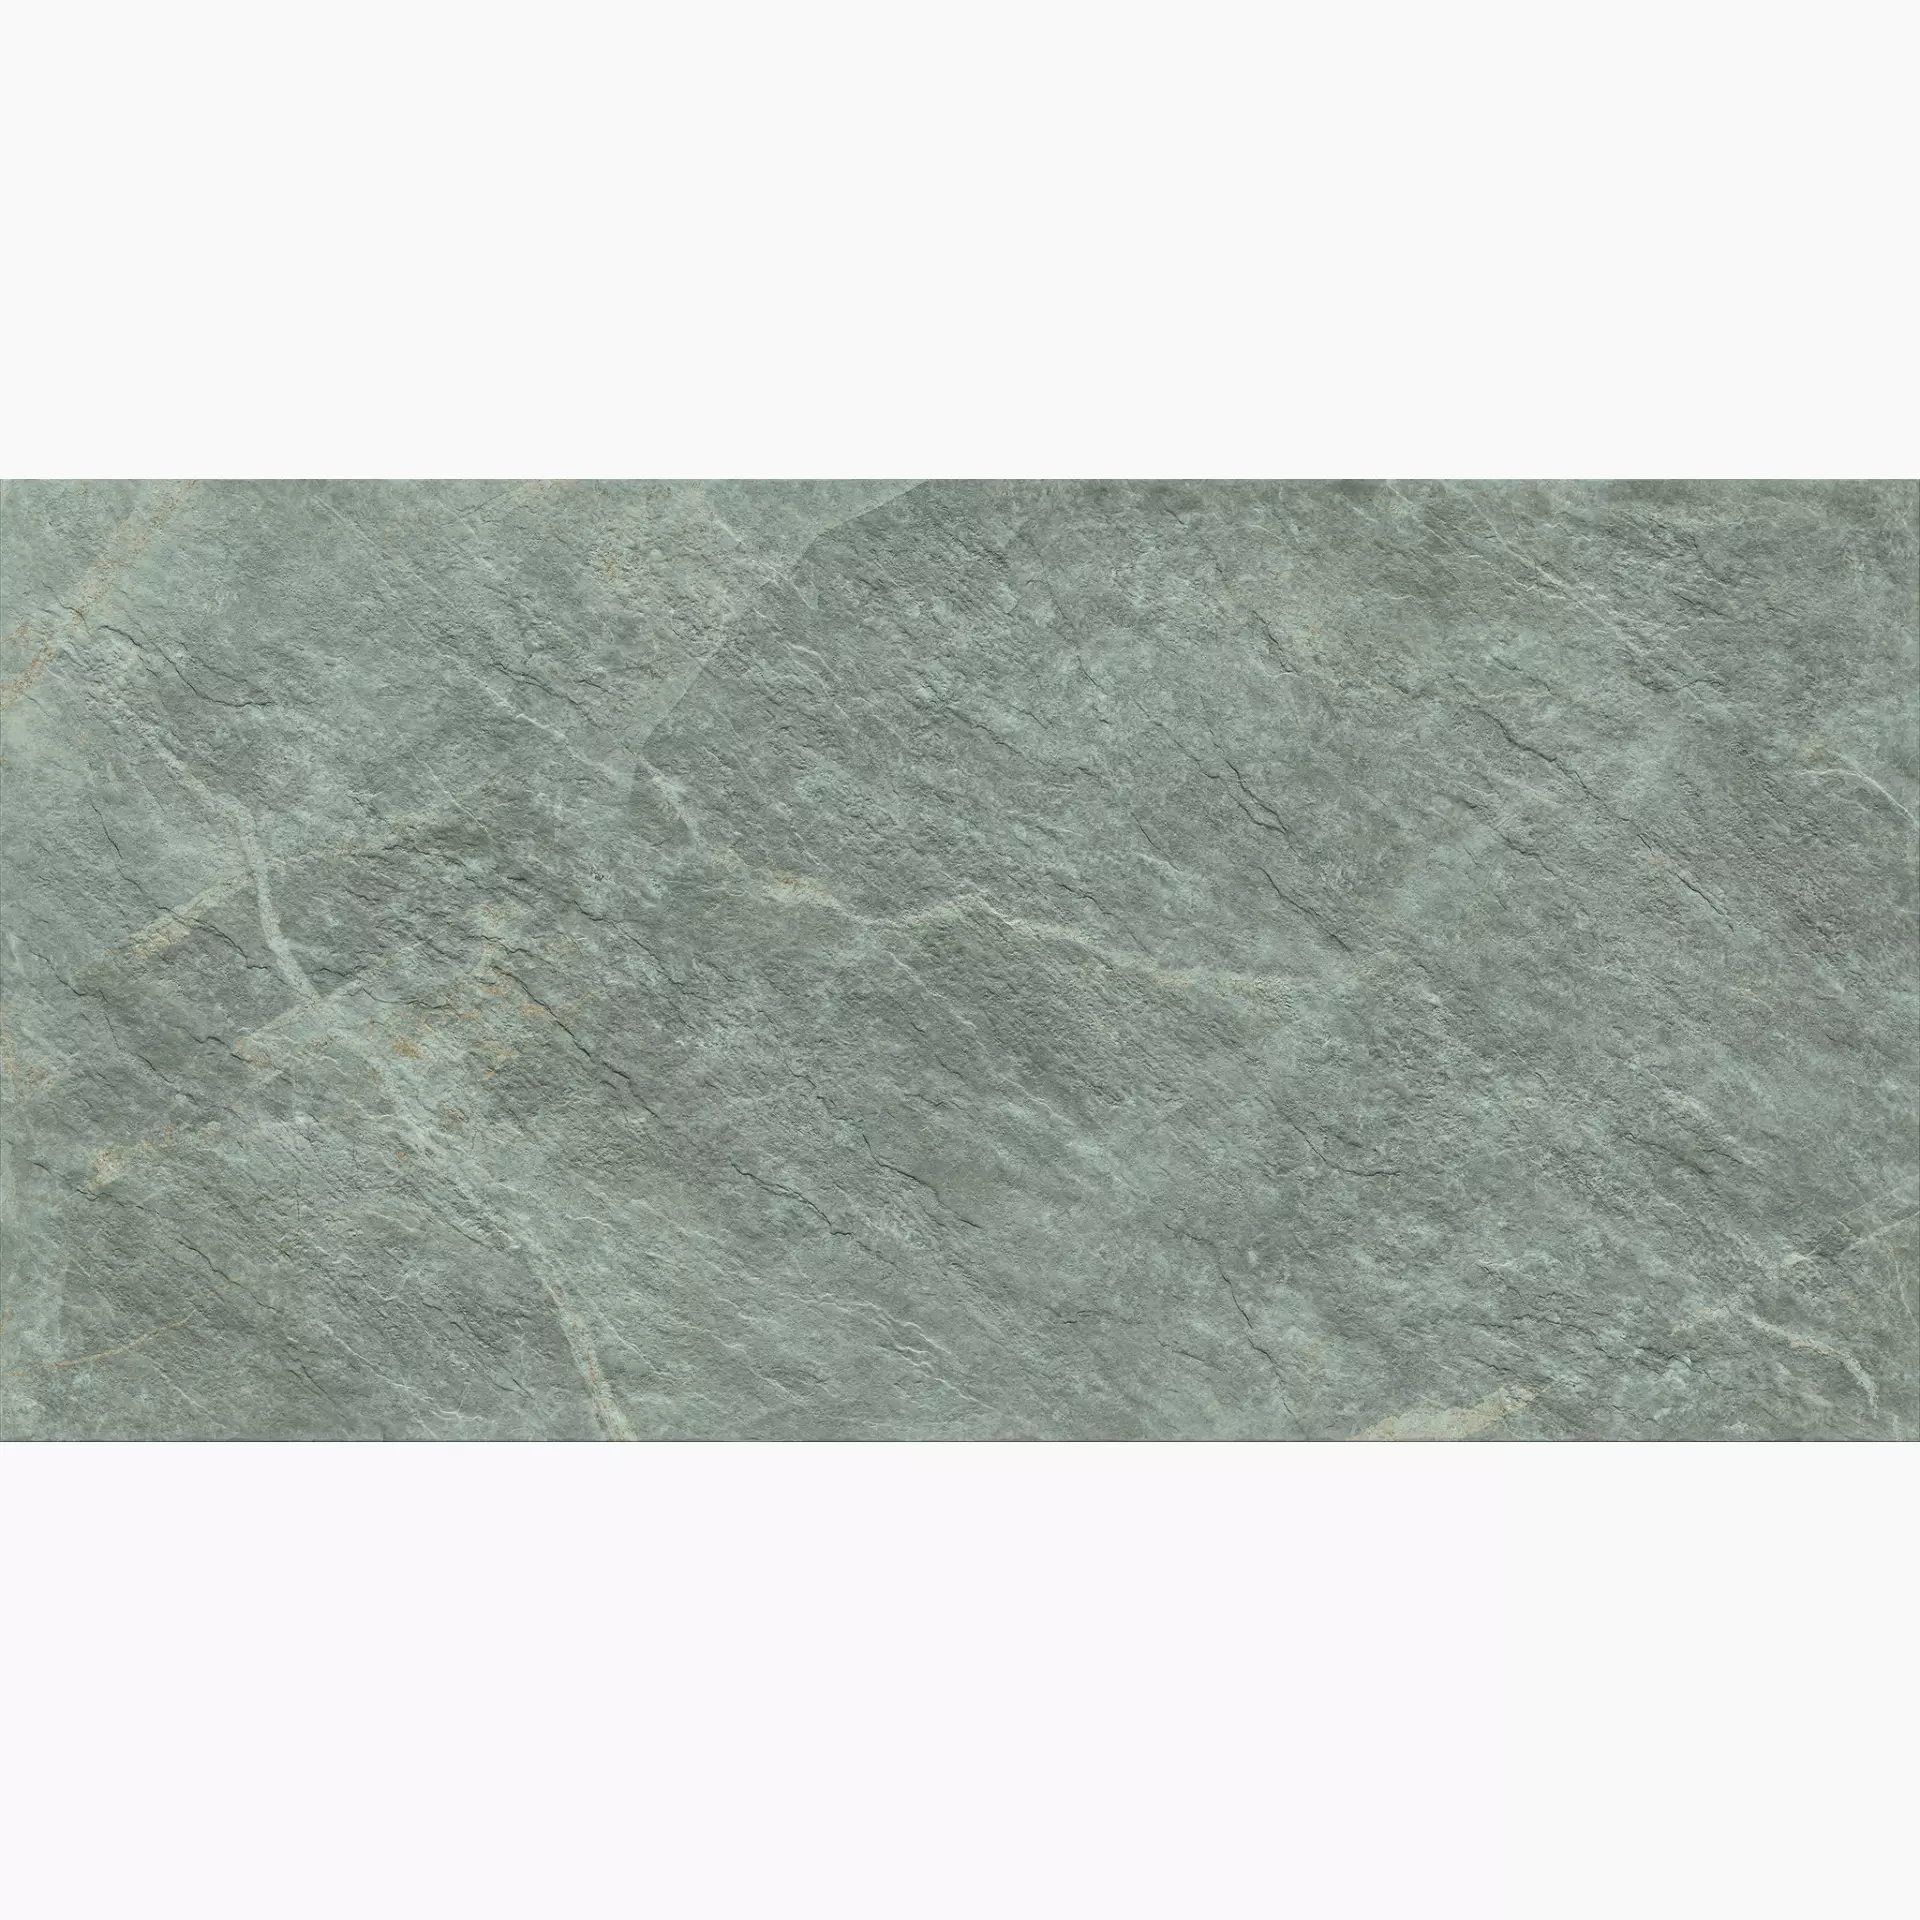 Atlasconcorde Marvel X Fior Di Bosco Hammered – Outdoor AGFB 60x120cm rectified 20mm